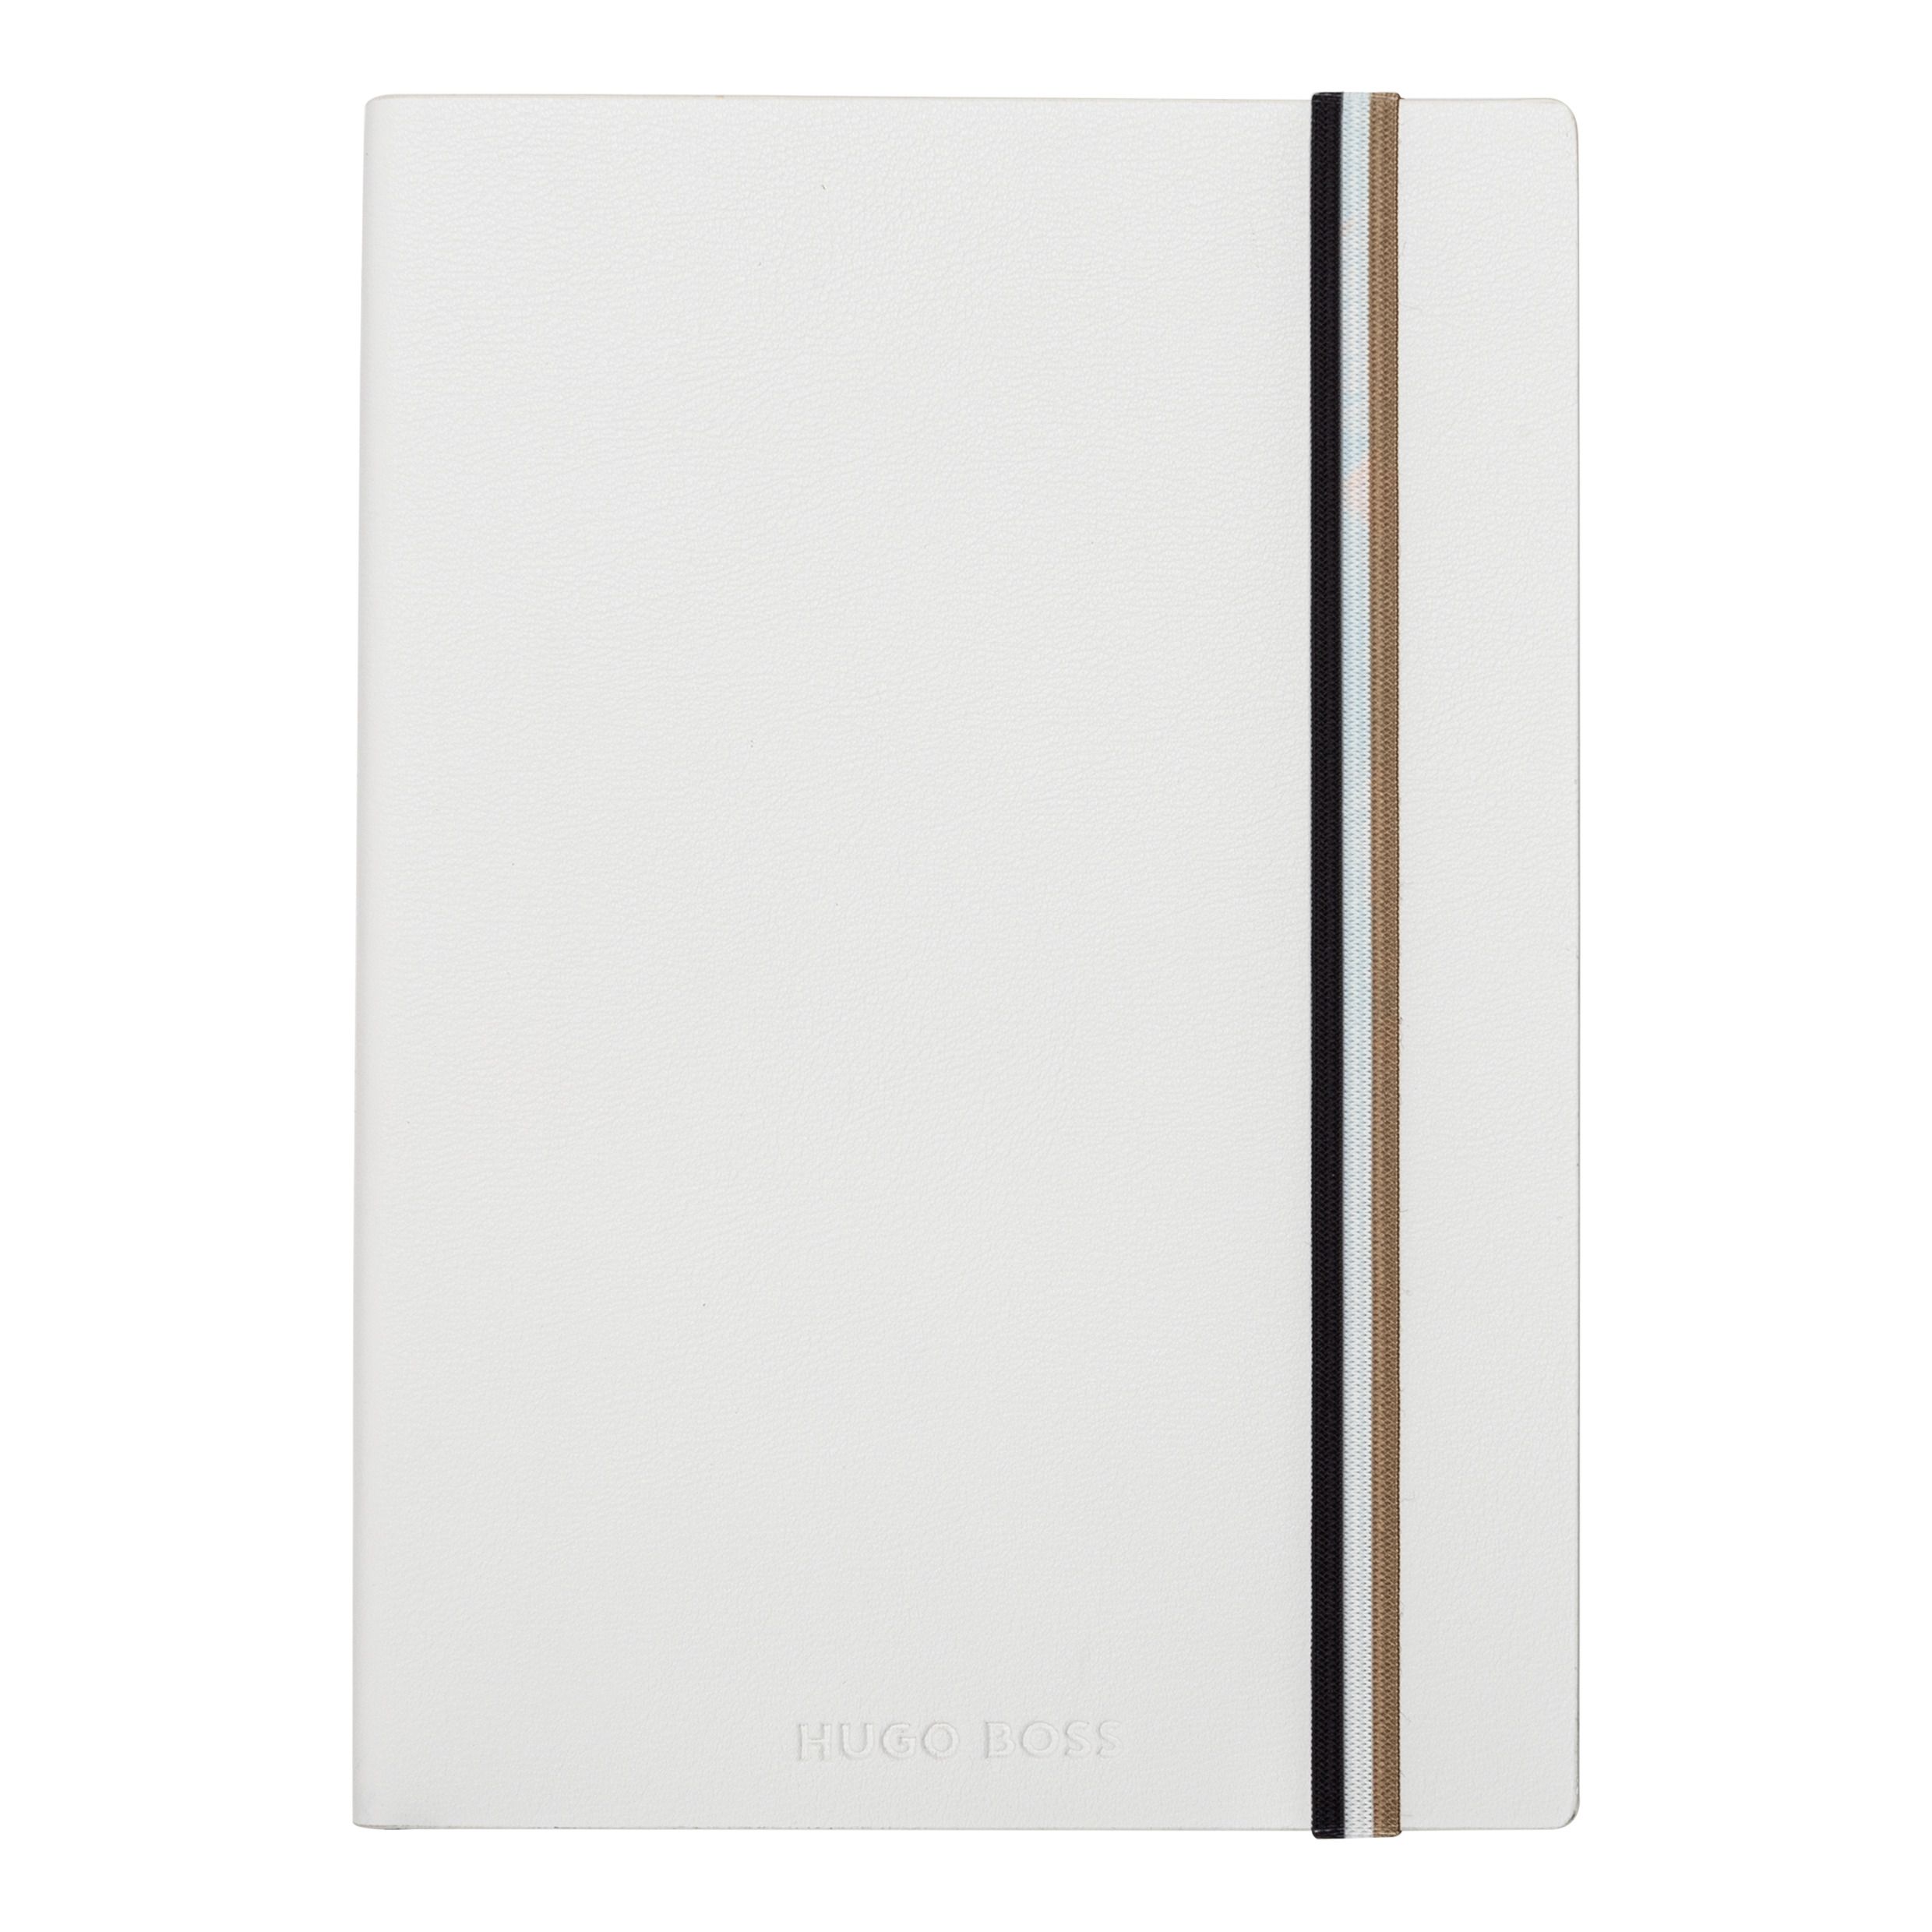 Hugo Boss Notebook A5 Iconic Camel Lined